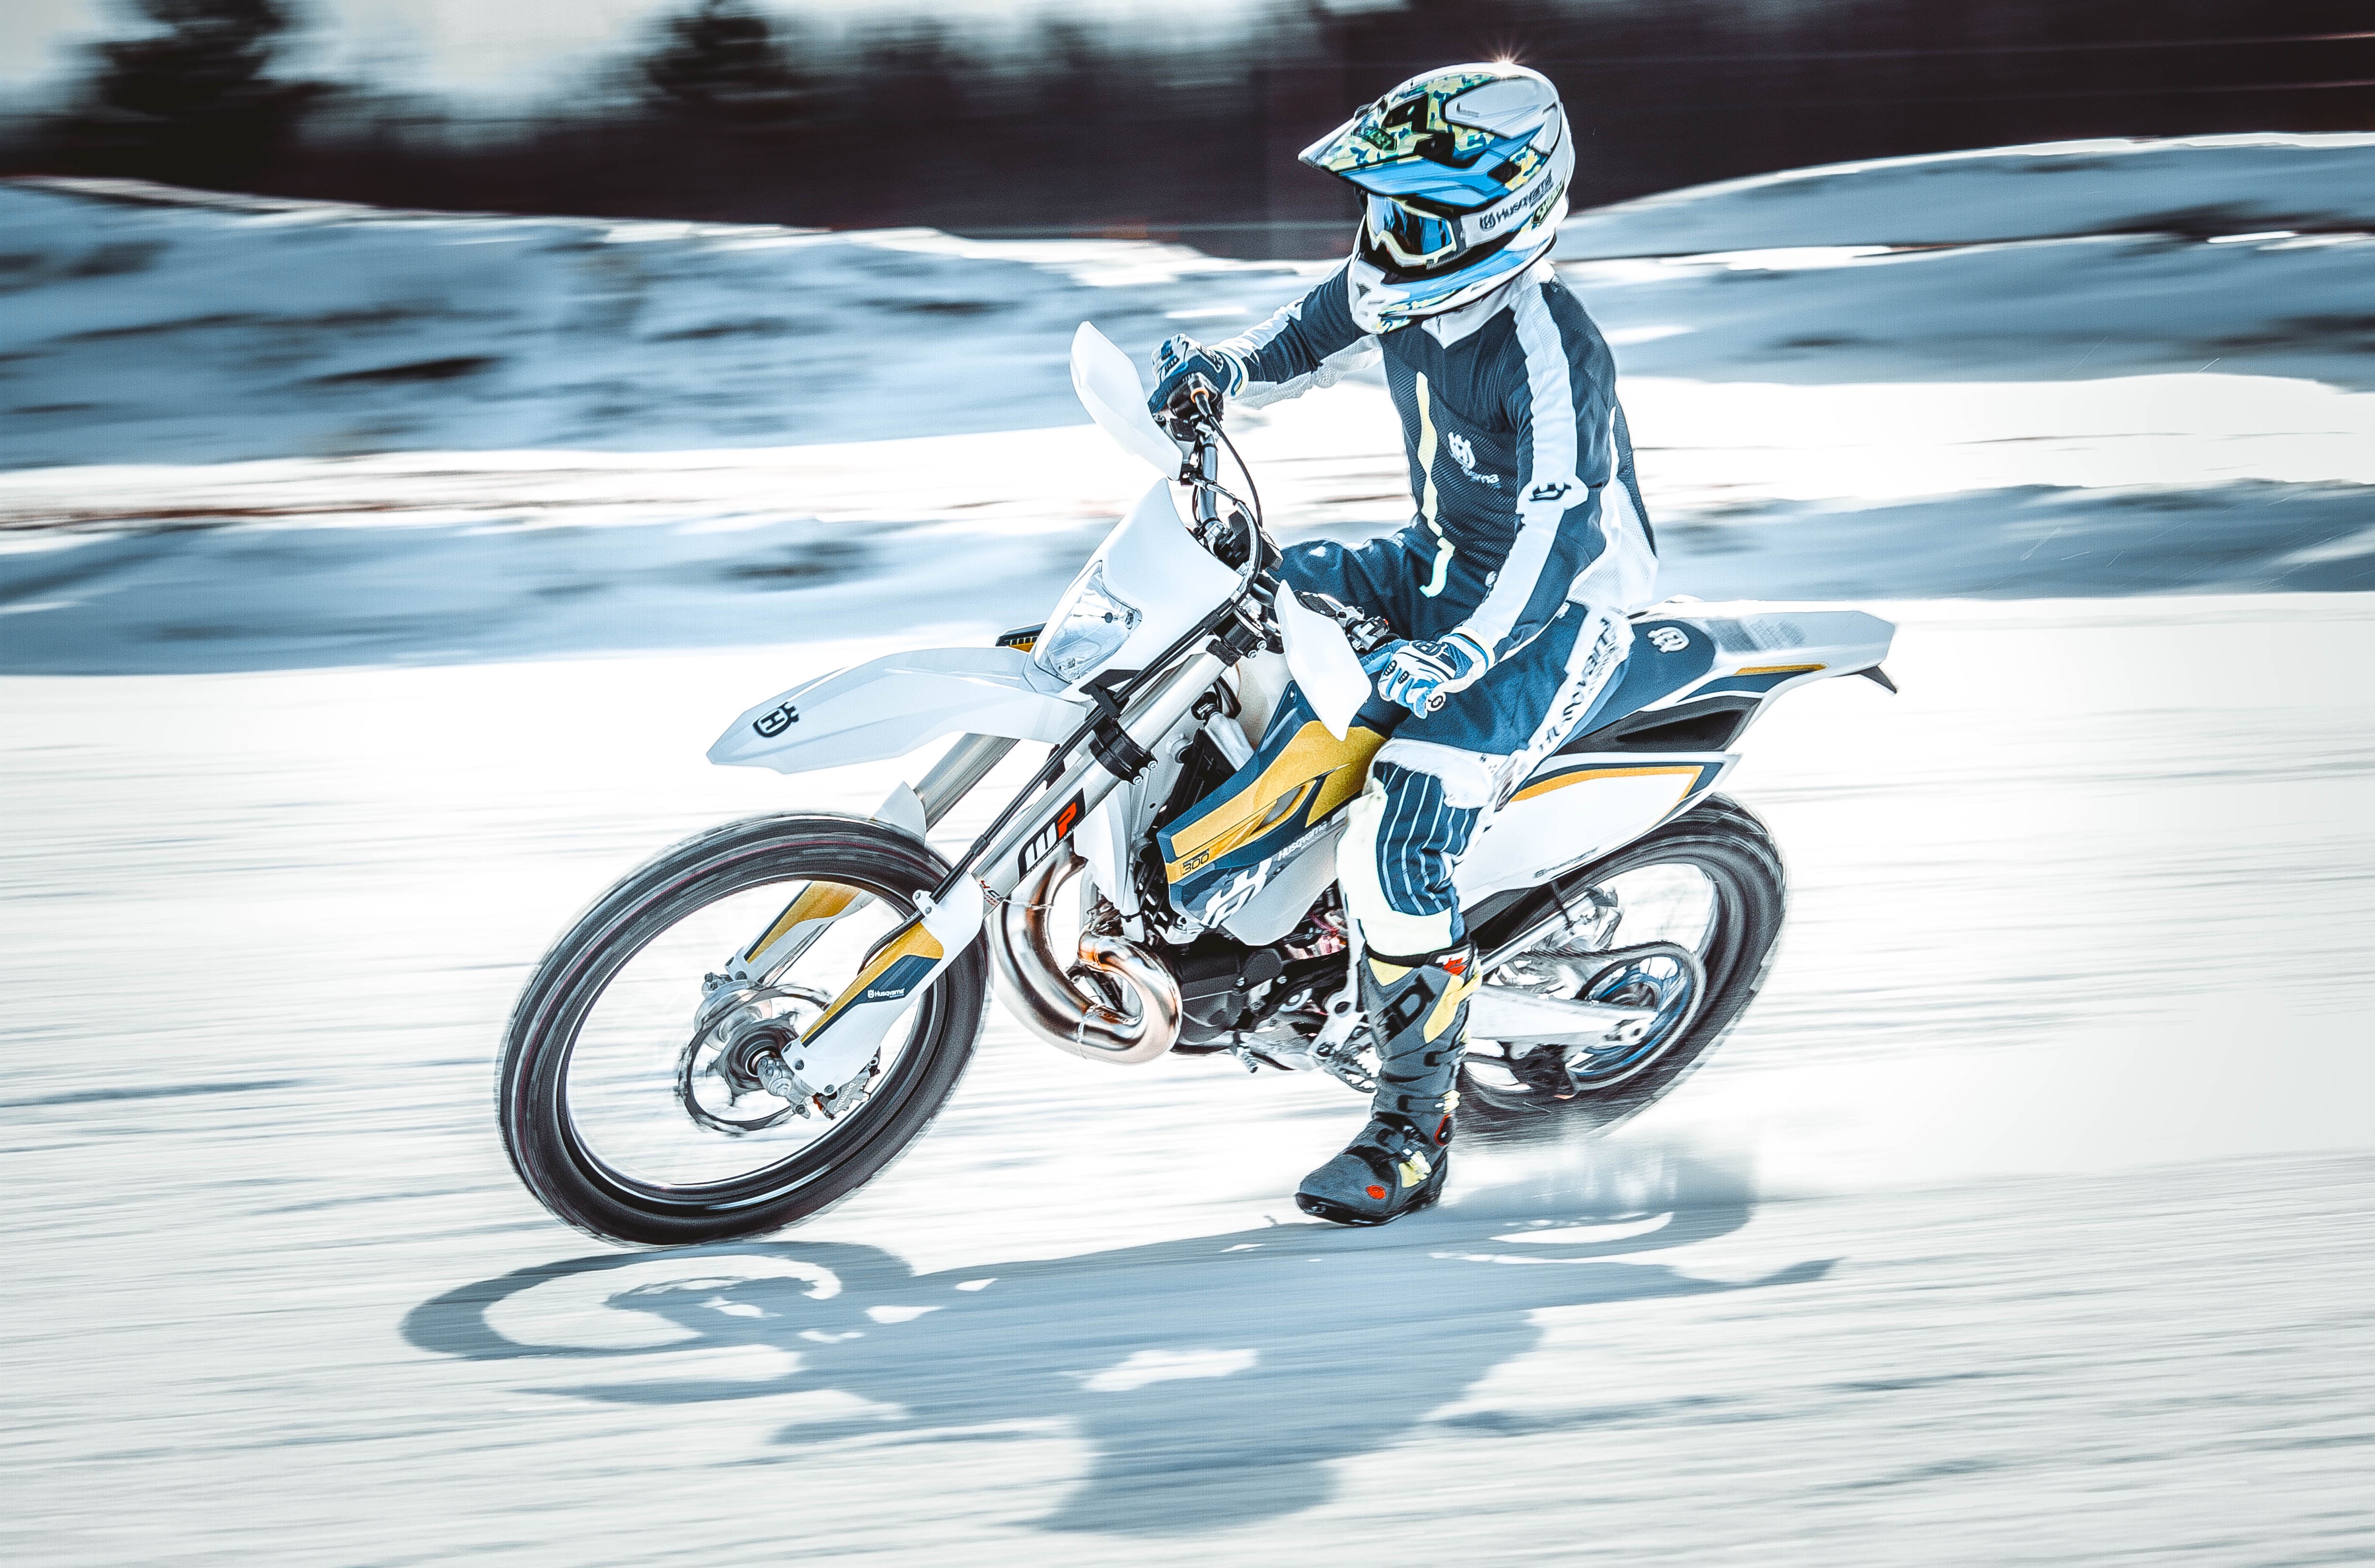 Cool Wallpapers snow, motorcycles, motorcyclist, speed